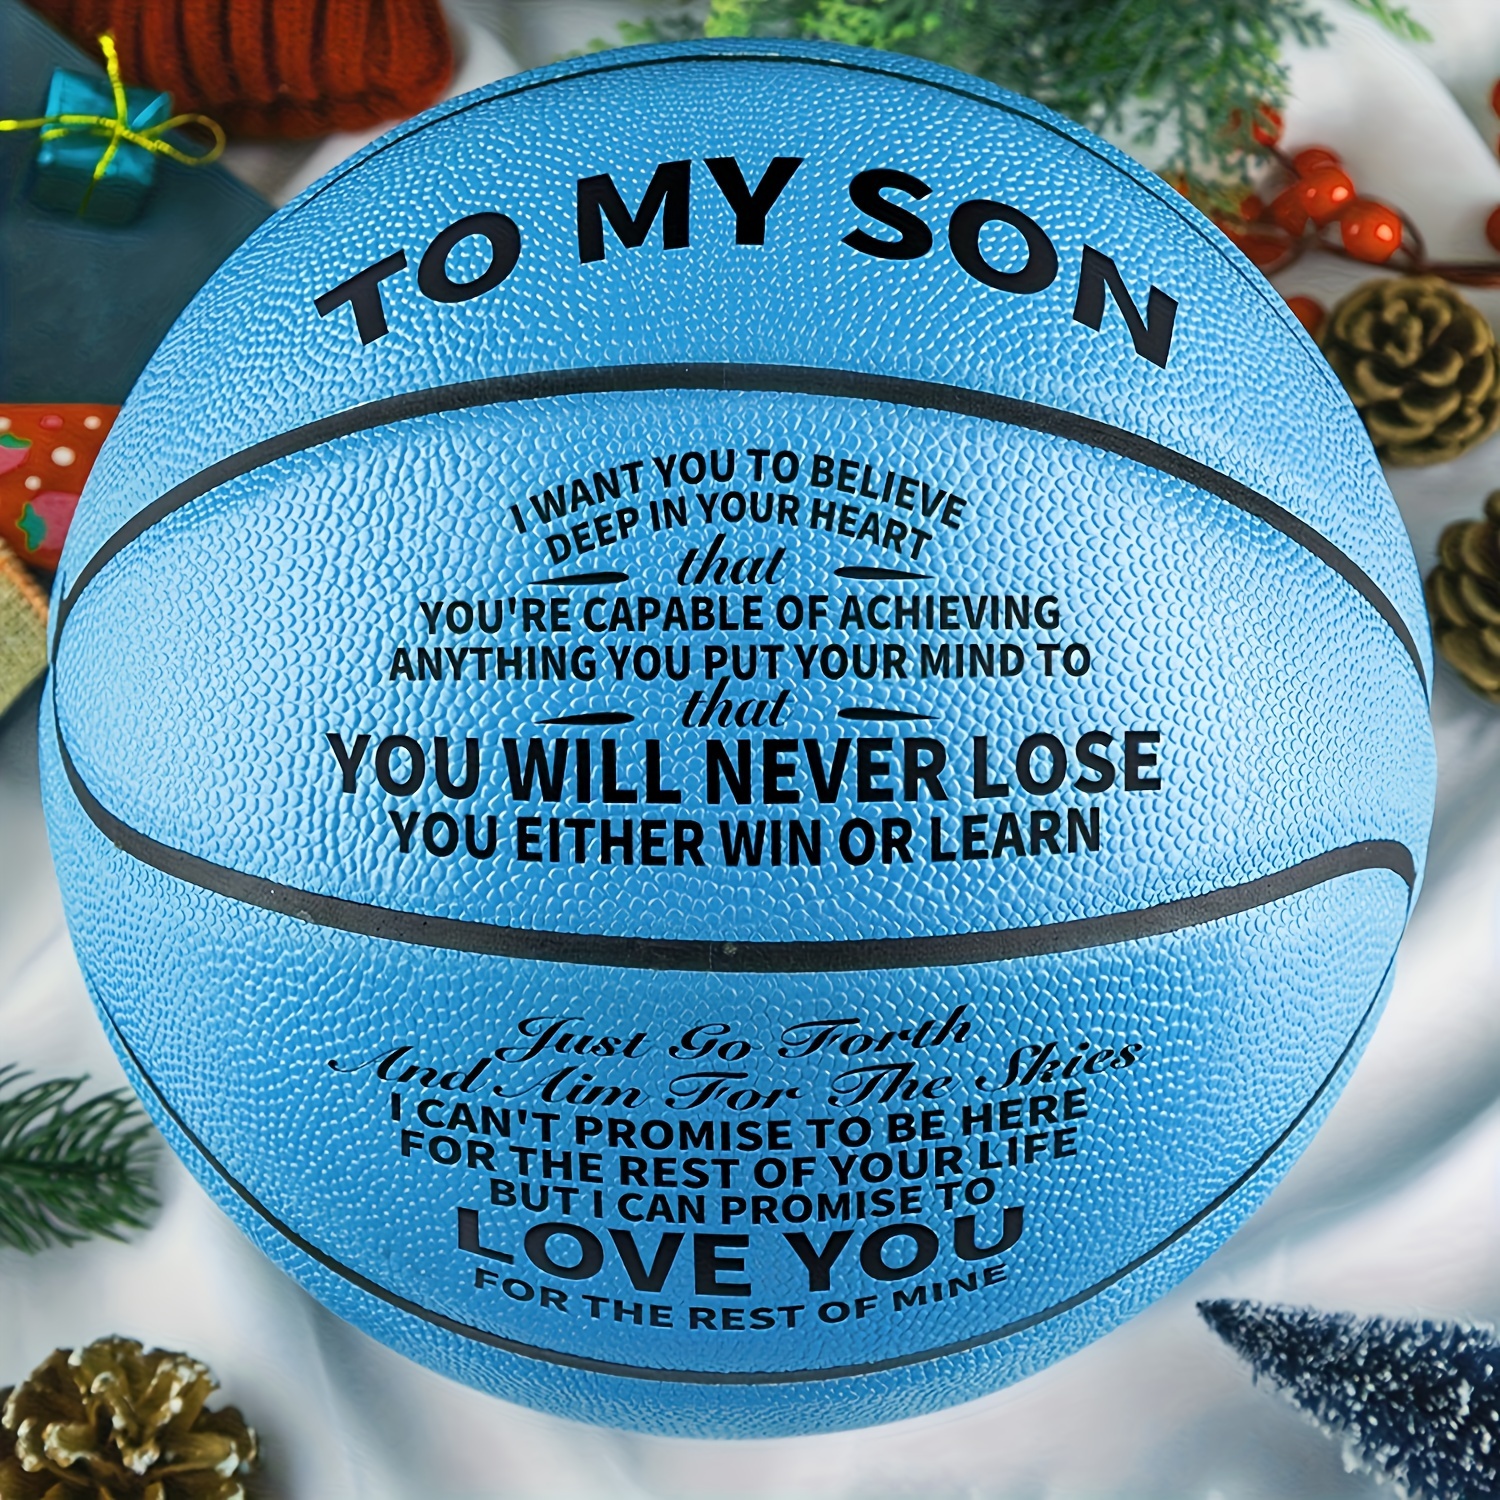 

1pc Blue Creative Basketball, Ideal Gift For Birthdays, Anniversaries, Christmas, International Standard Size (with A Pump)